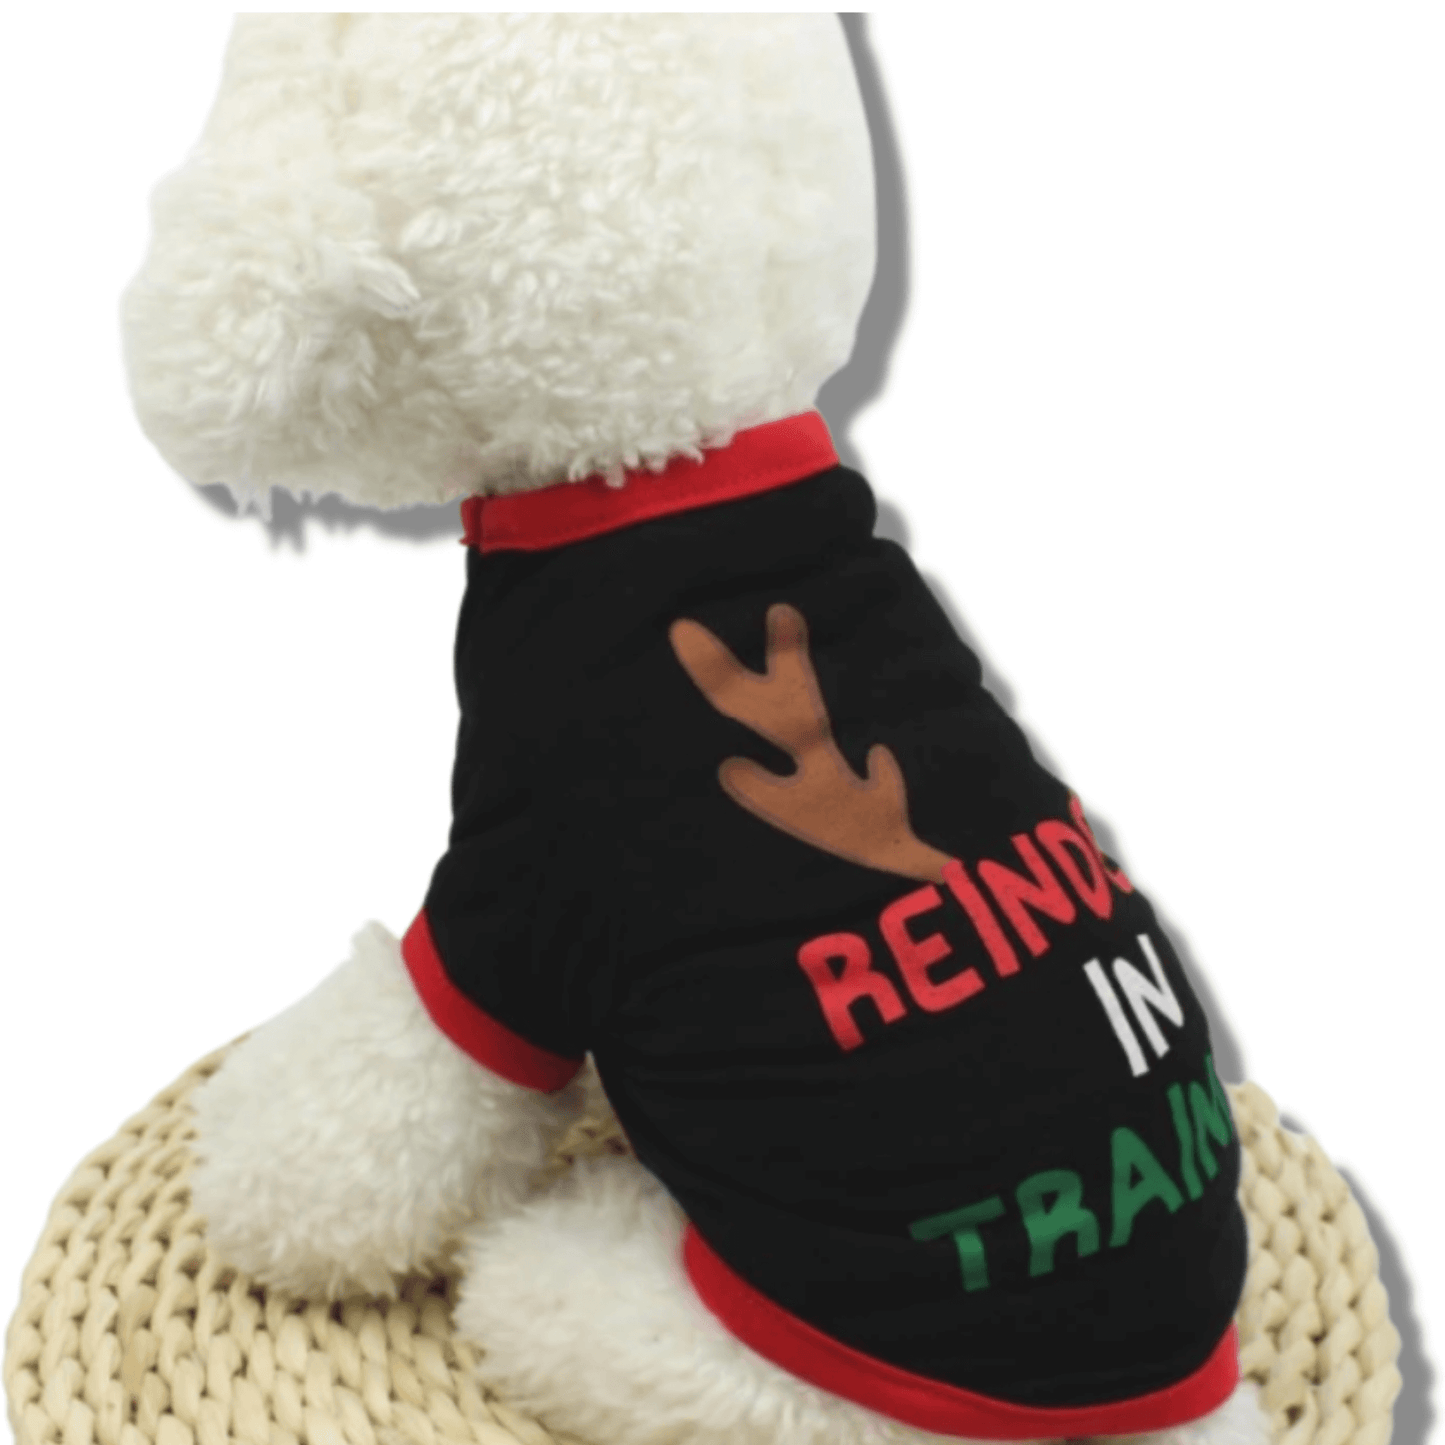 Reindeer in training dog tee shirt, fashion accessory, let's pawty